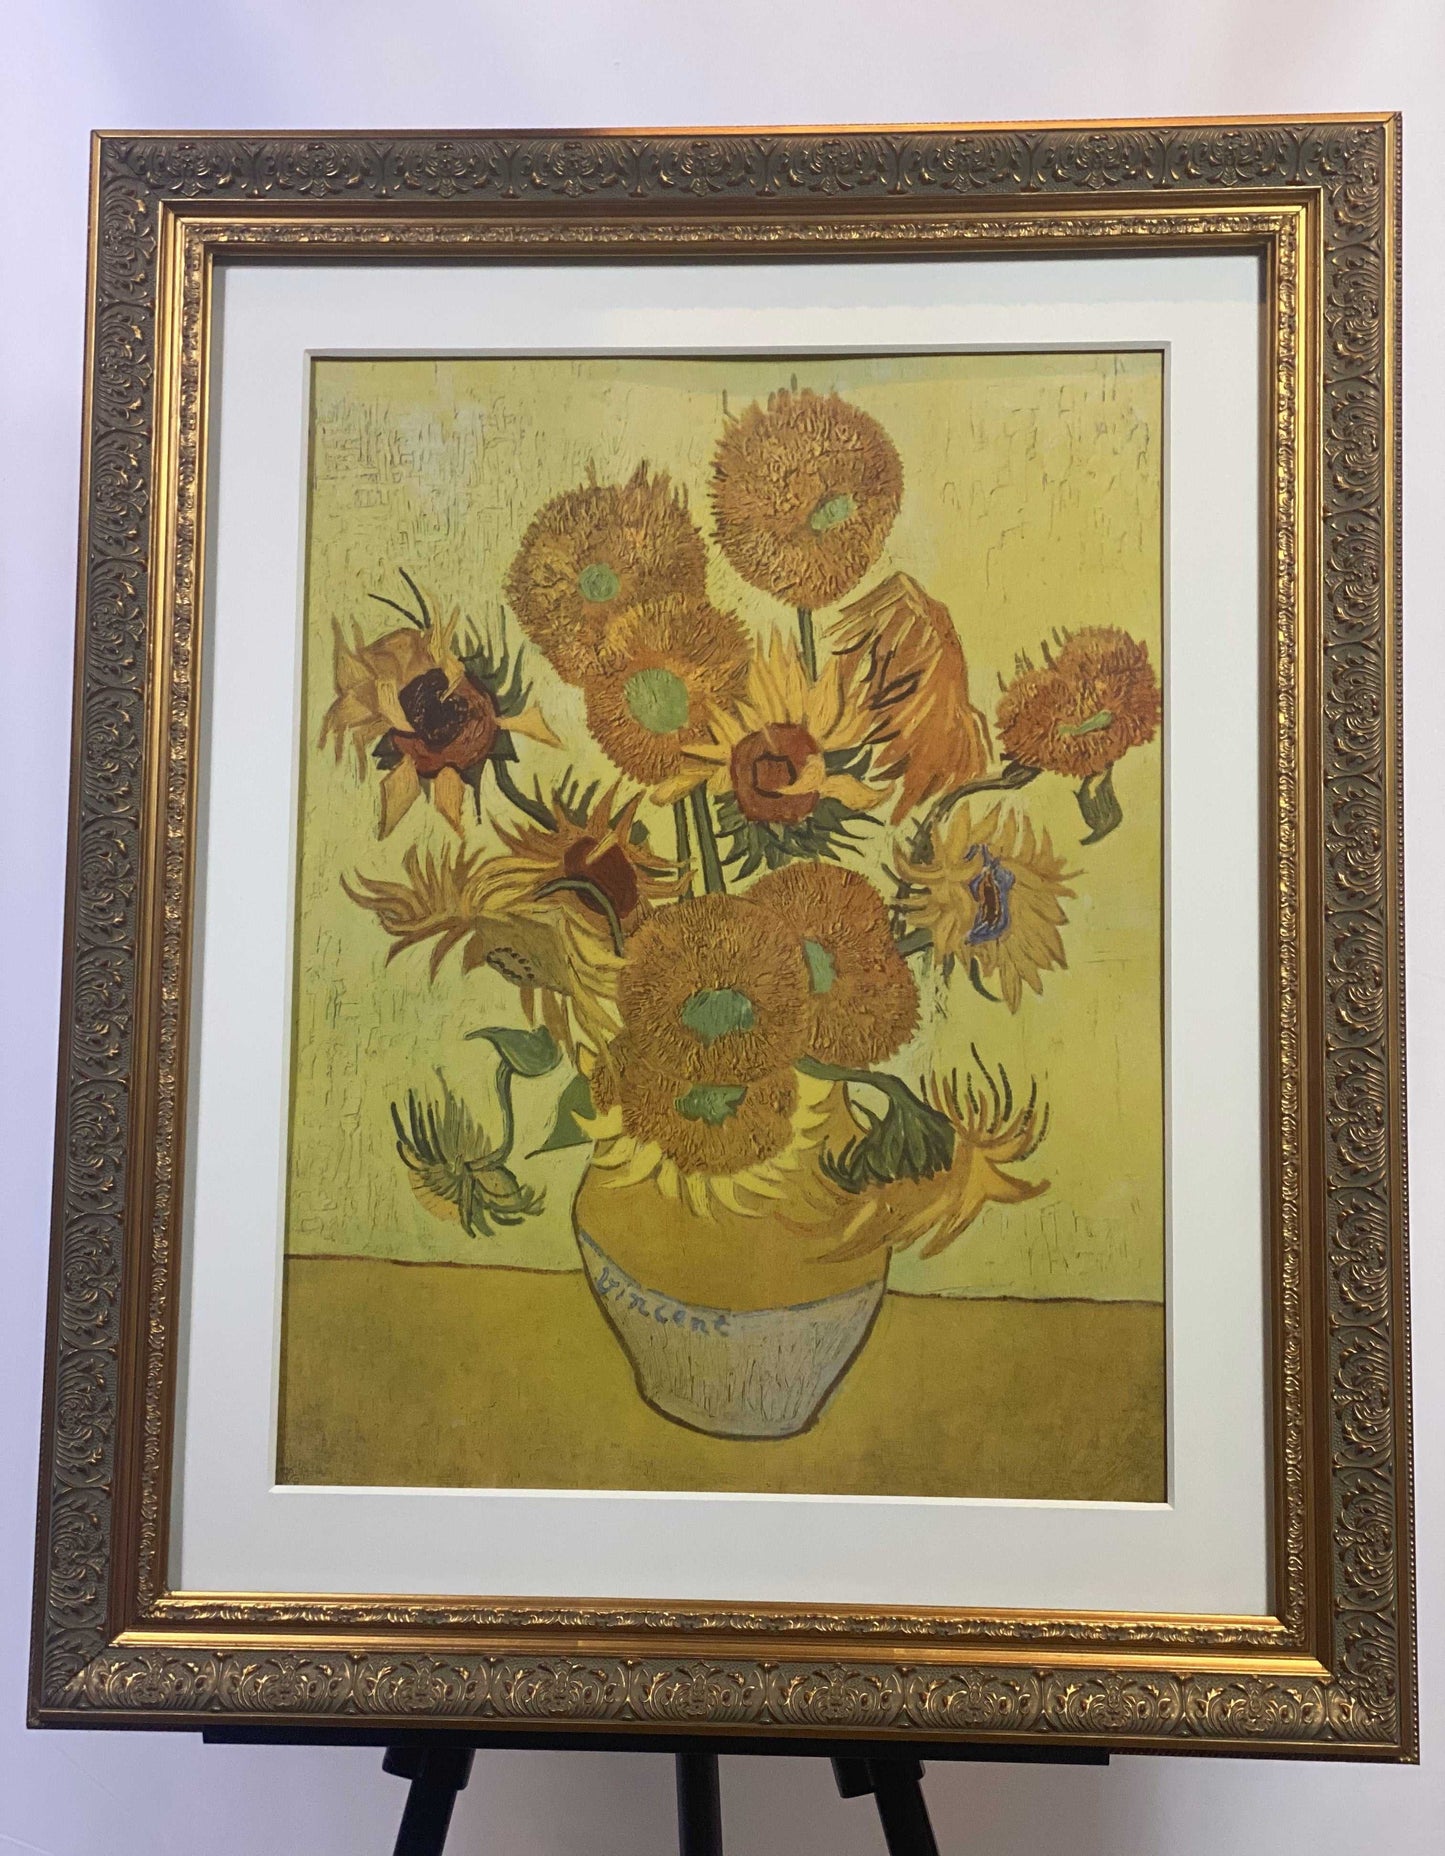 Vincent VAN GOGH Lithograph Limited Edition "Sunflowers" 1937